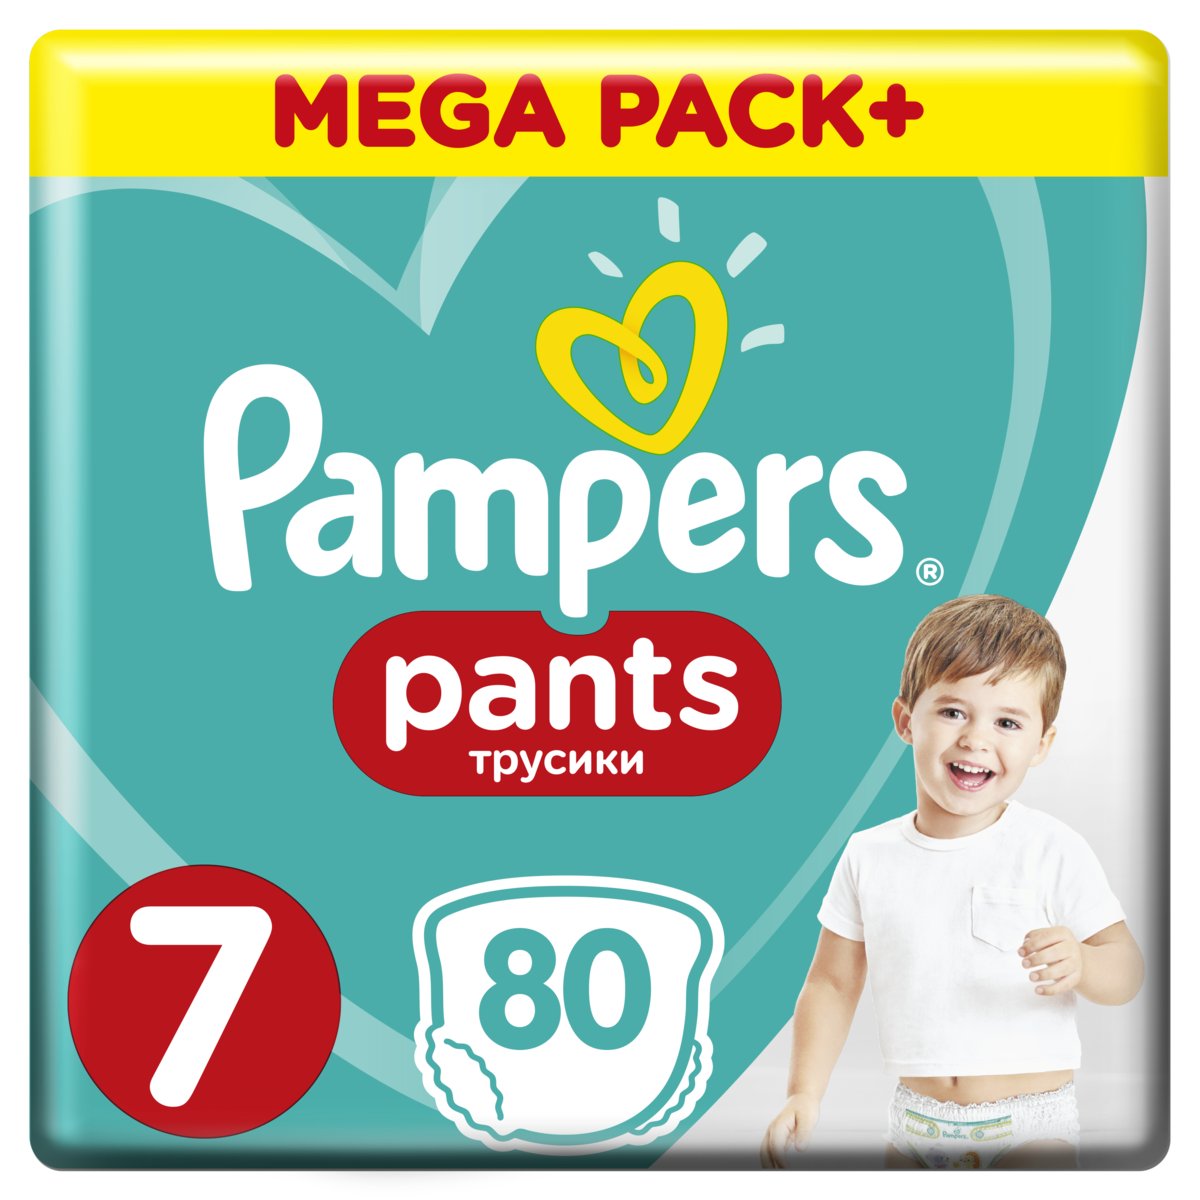 brother dcp-j925dw pampers